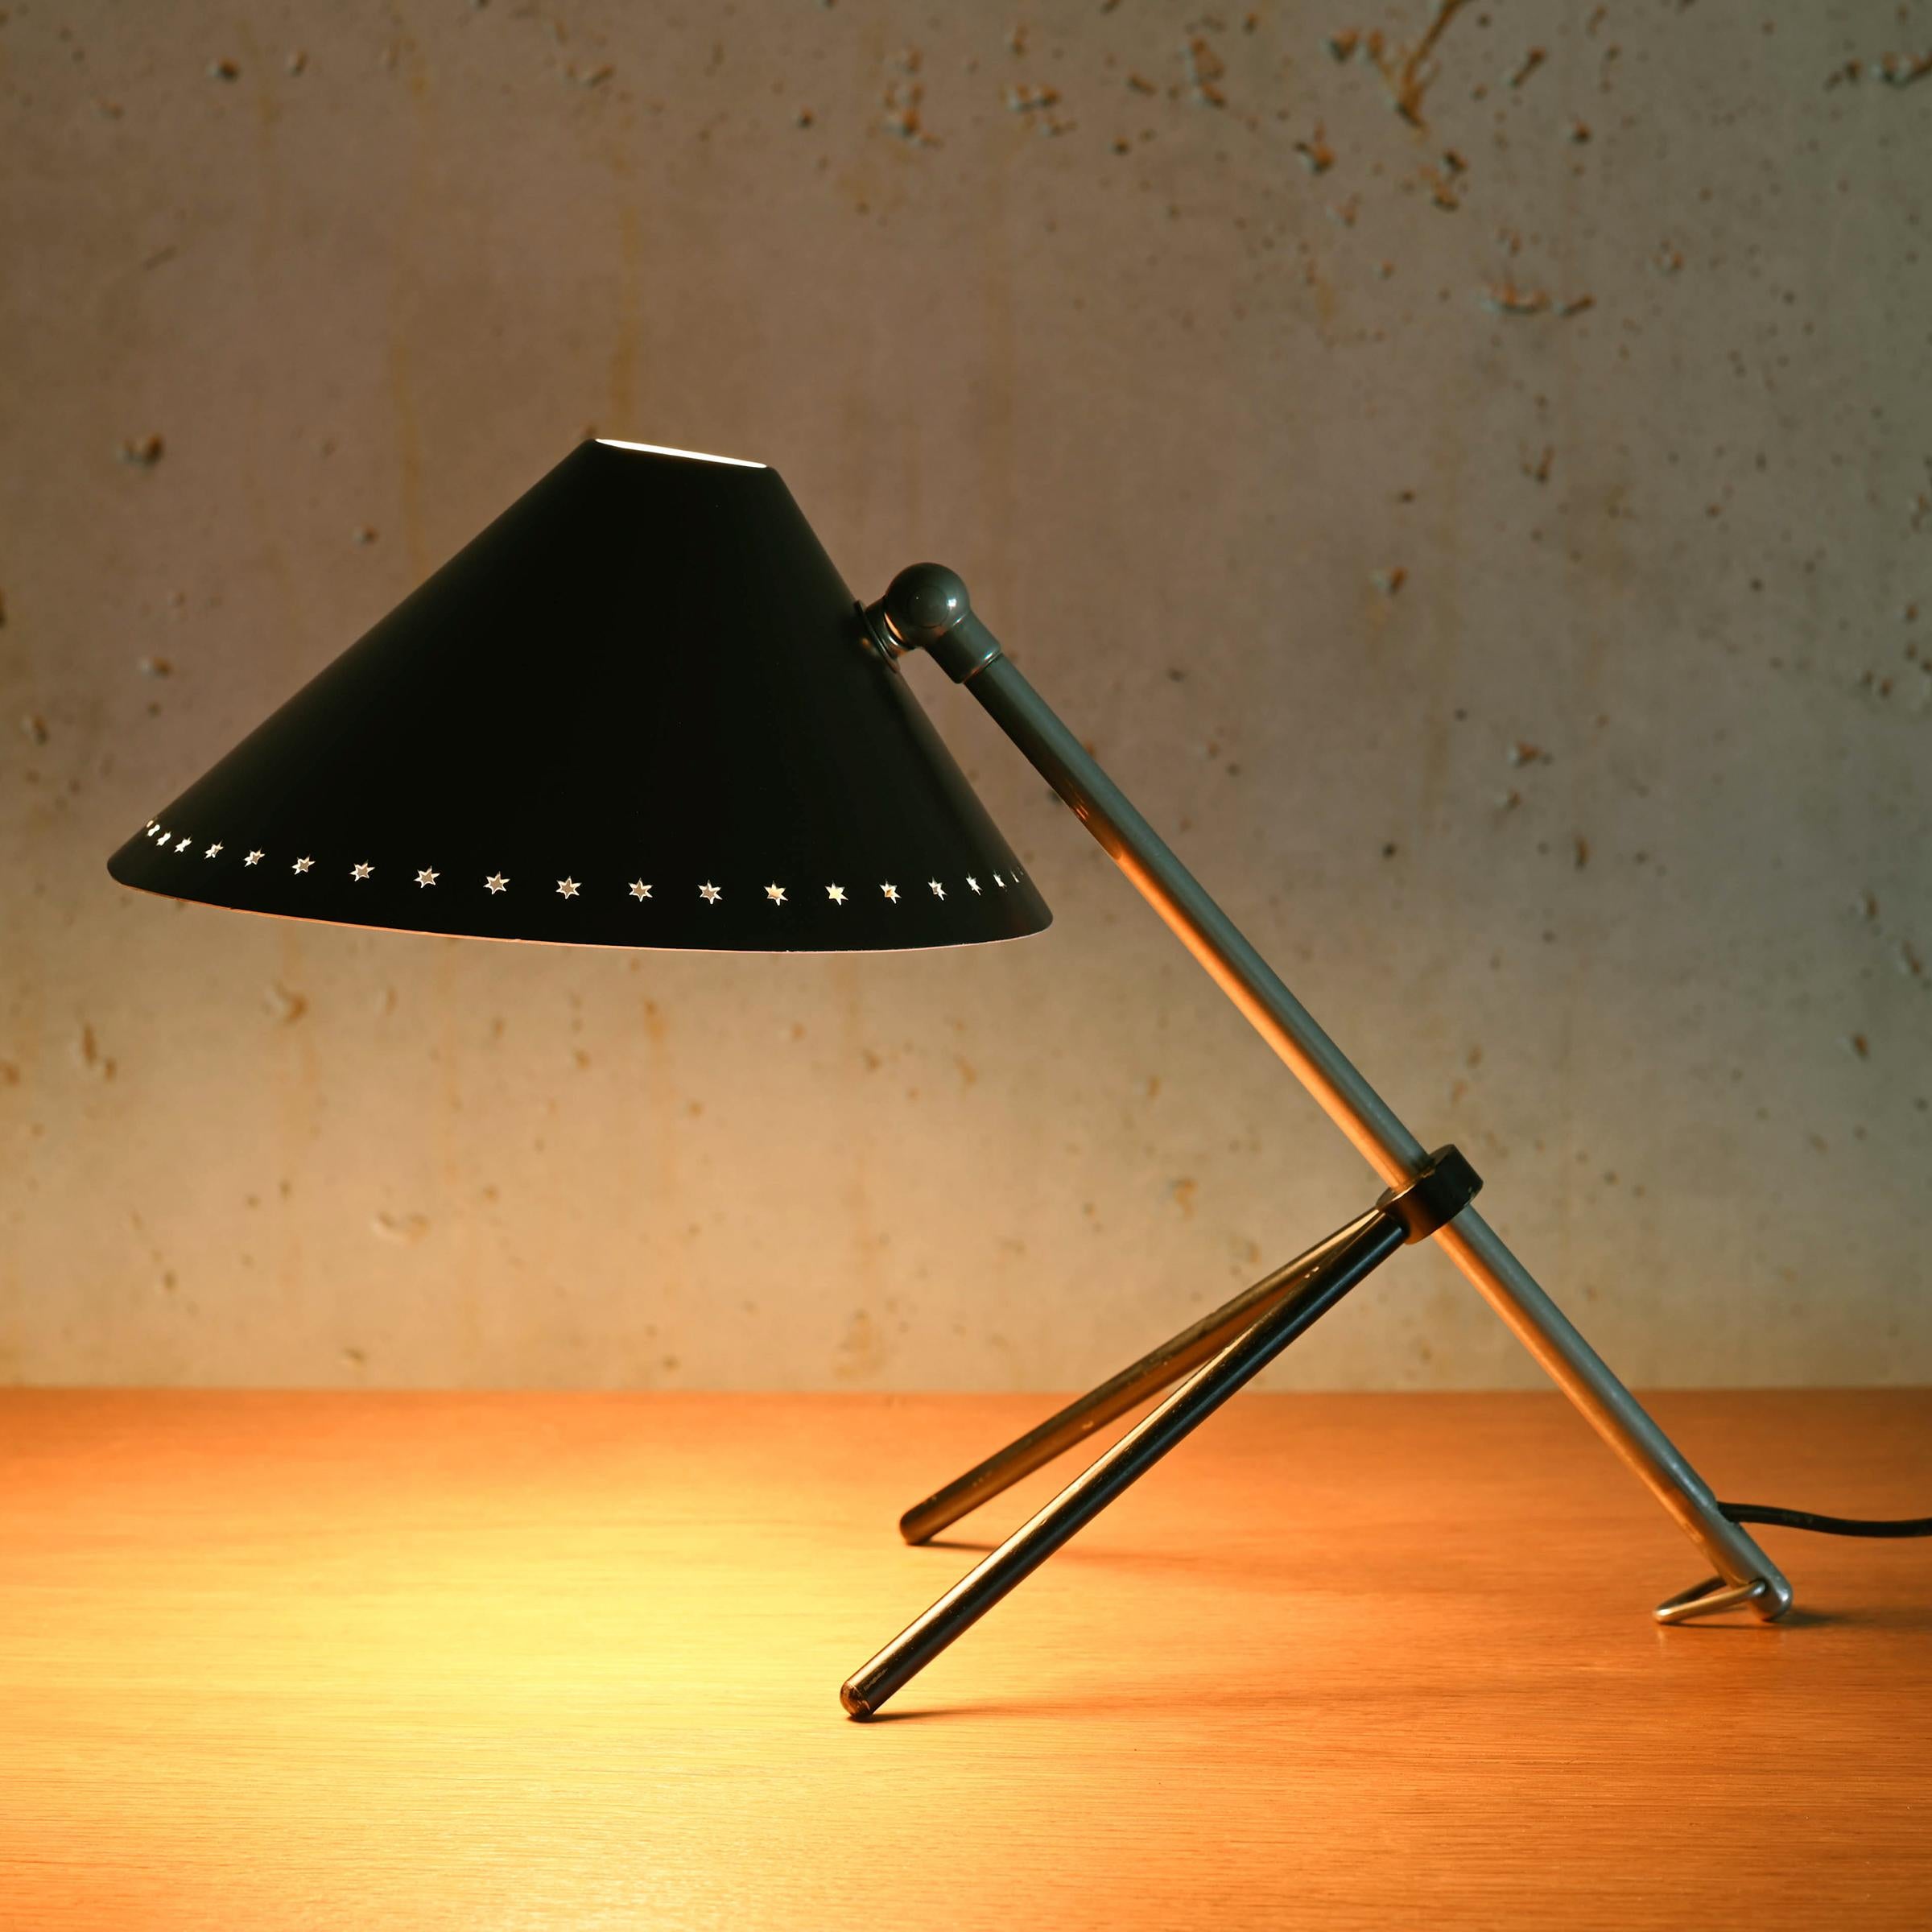 Mid-Century Modern Pinocchio Lamp with black shade by H. Busquet for Hala Zeist, Netherlands